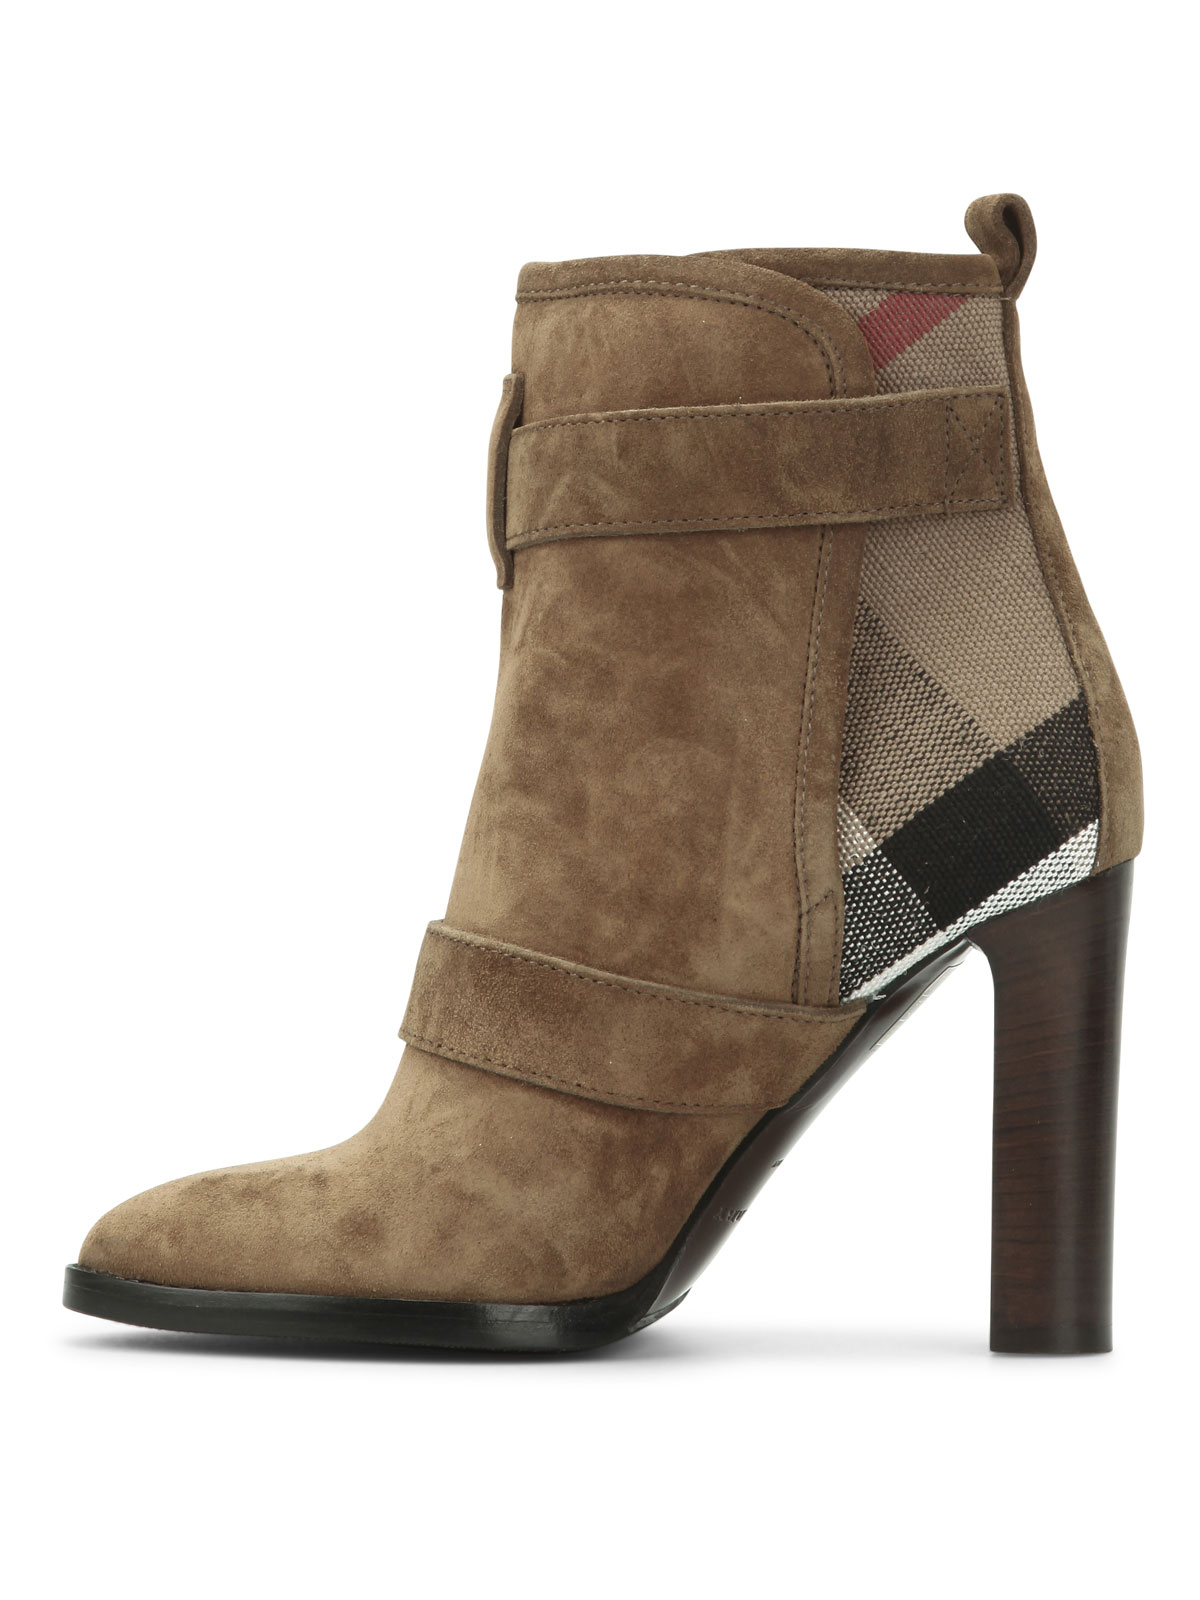 burberry ankle boots sale